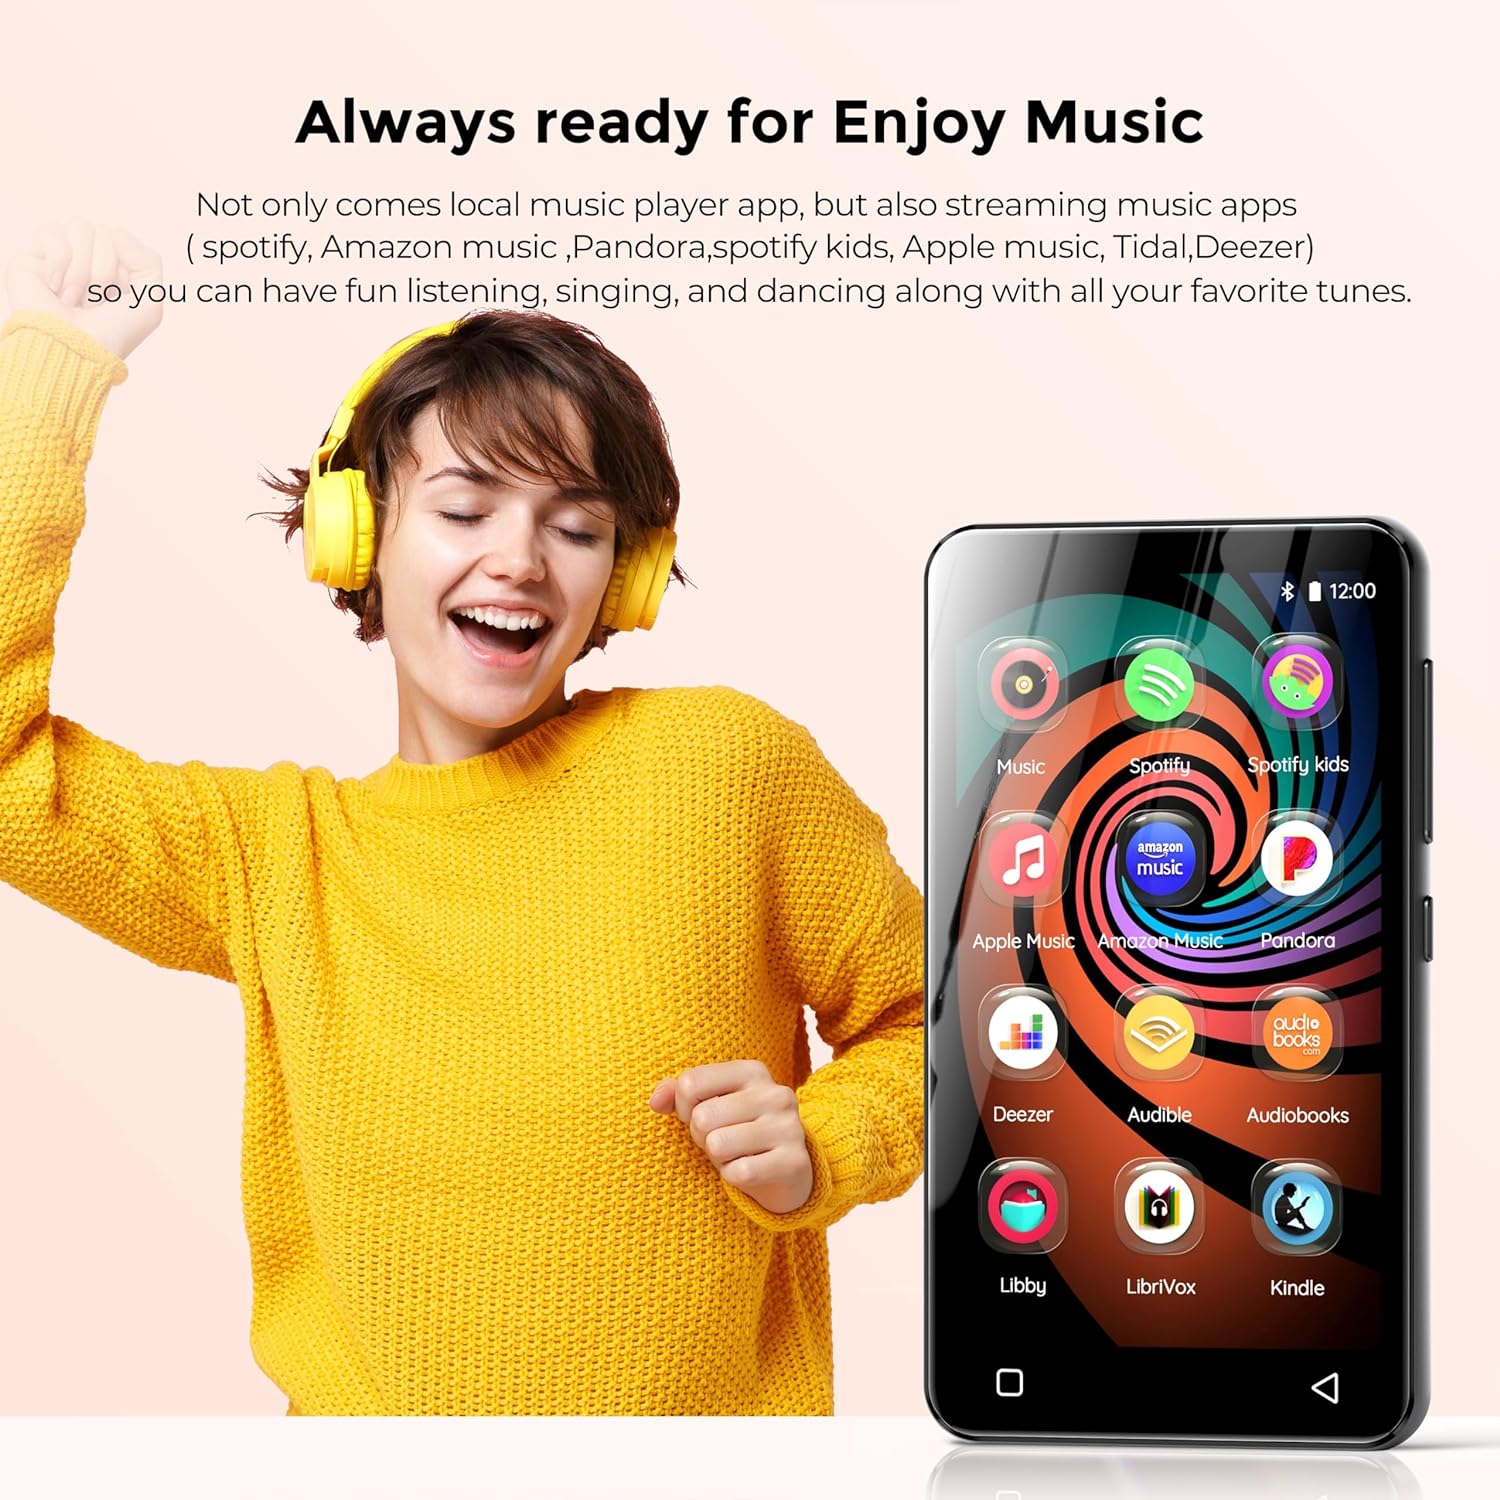 160GB MP3 Player with Bluetooth and WiFi, innioasis Music Player with Spotify,Pandora,Amazon Music,4" Touch Screen Android MP4 MP3 Player for Kids